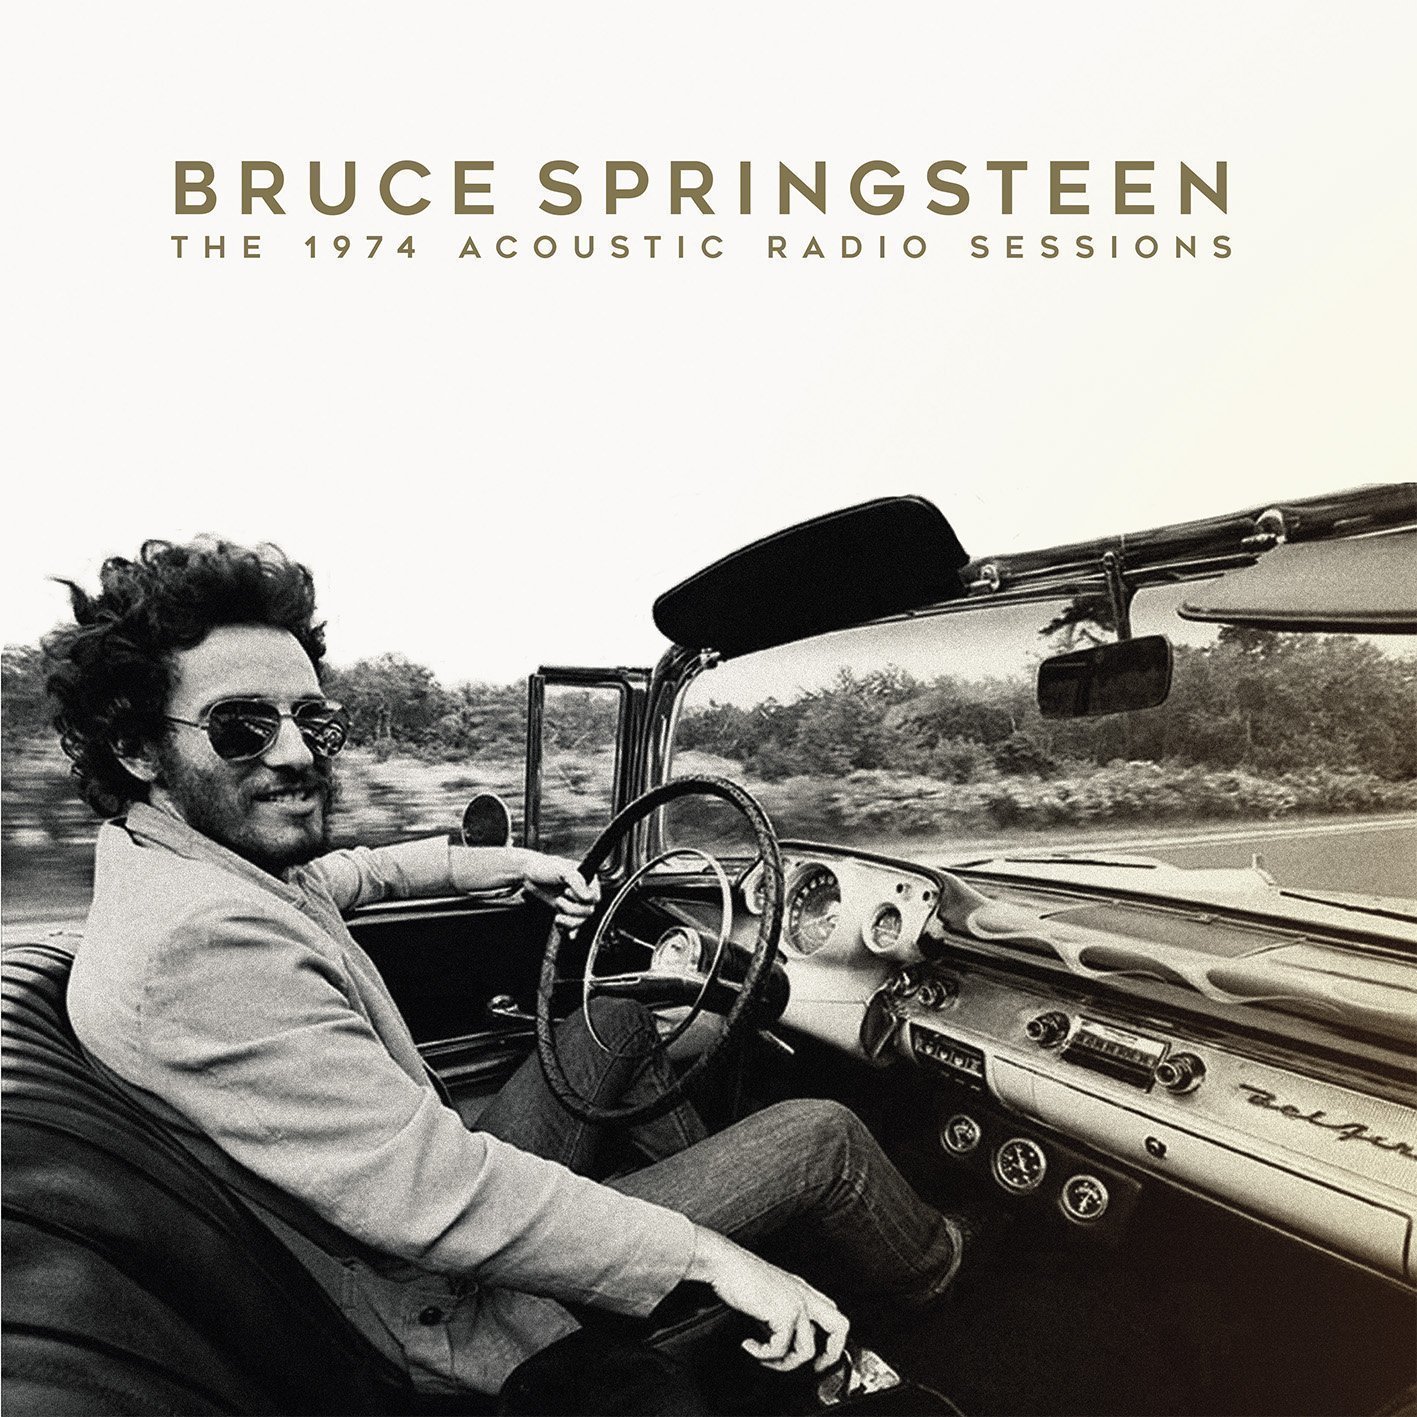 Vinylskiva Bruce Springsteen - The 1974 Acoustic Radio Sessions (2 LP)